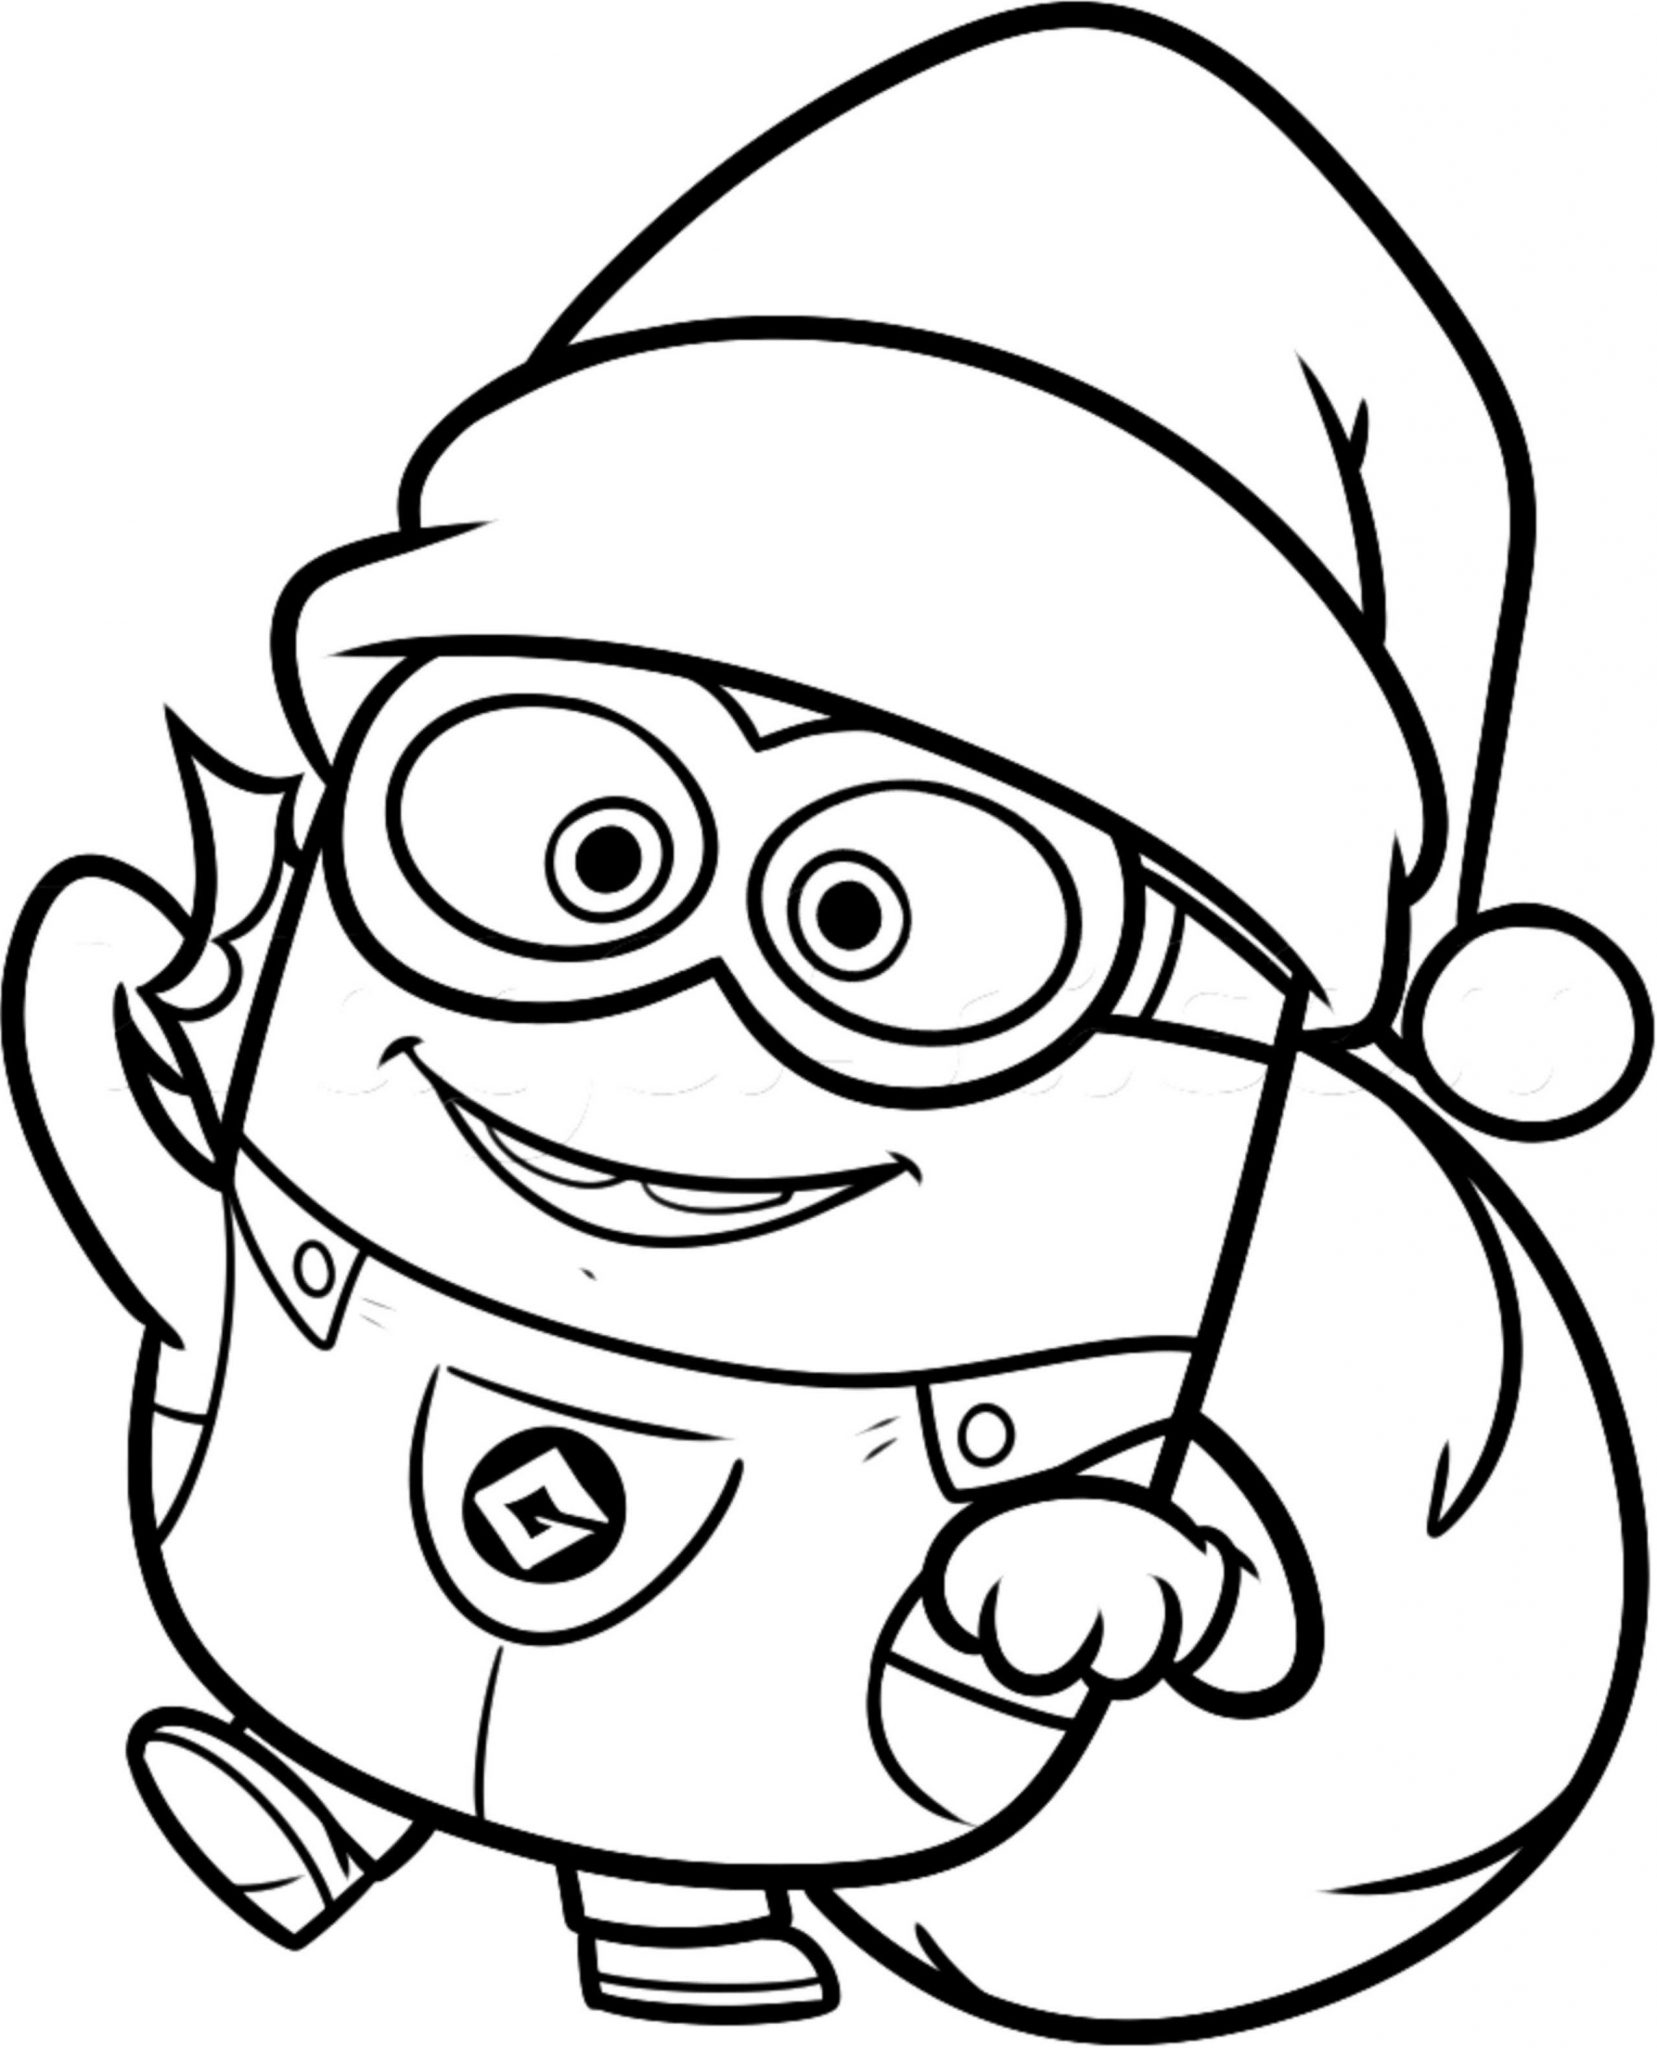 christmasminionscoloringpages